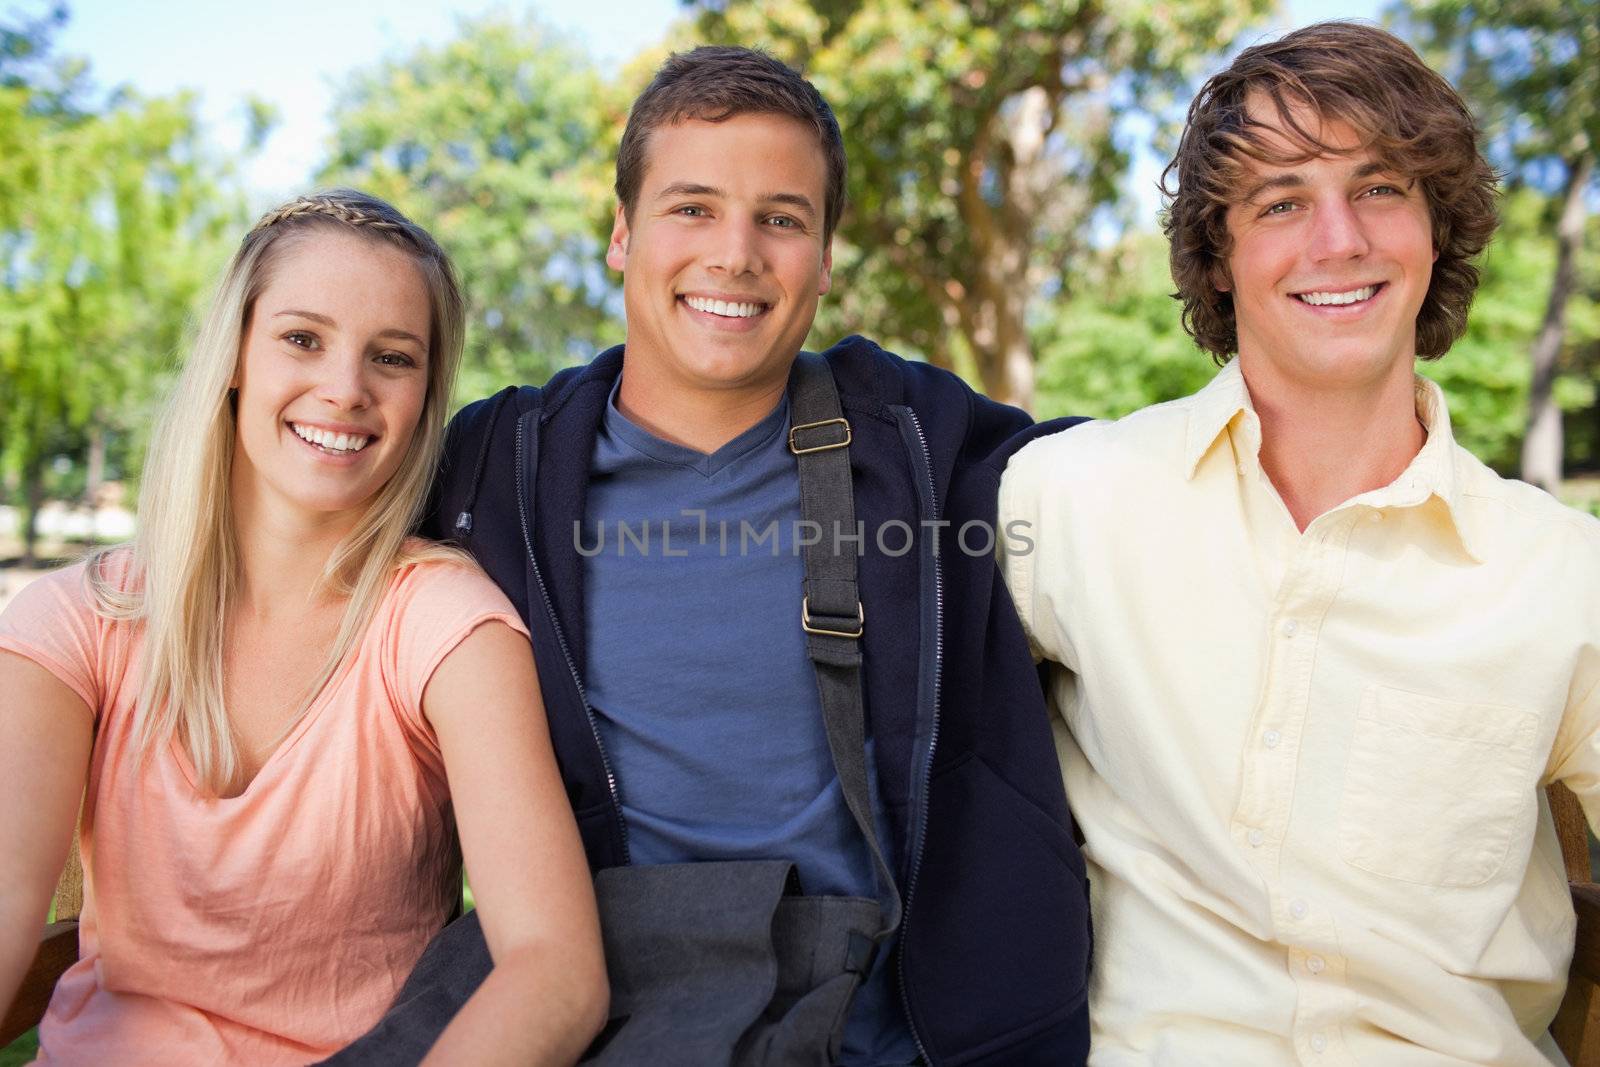 Portrait of three smiling students in a park together